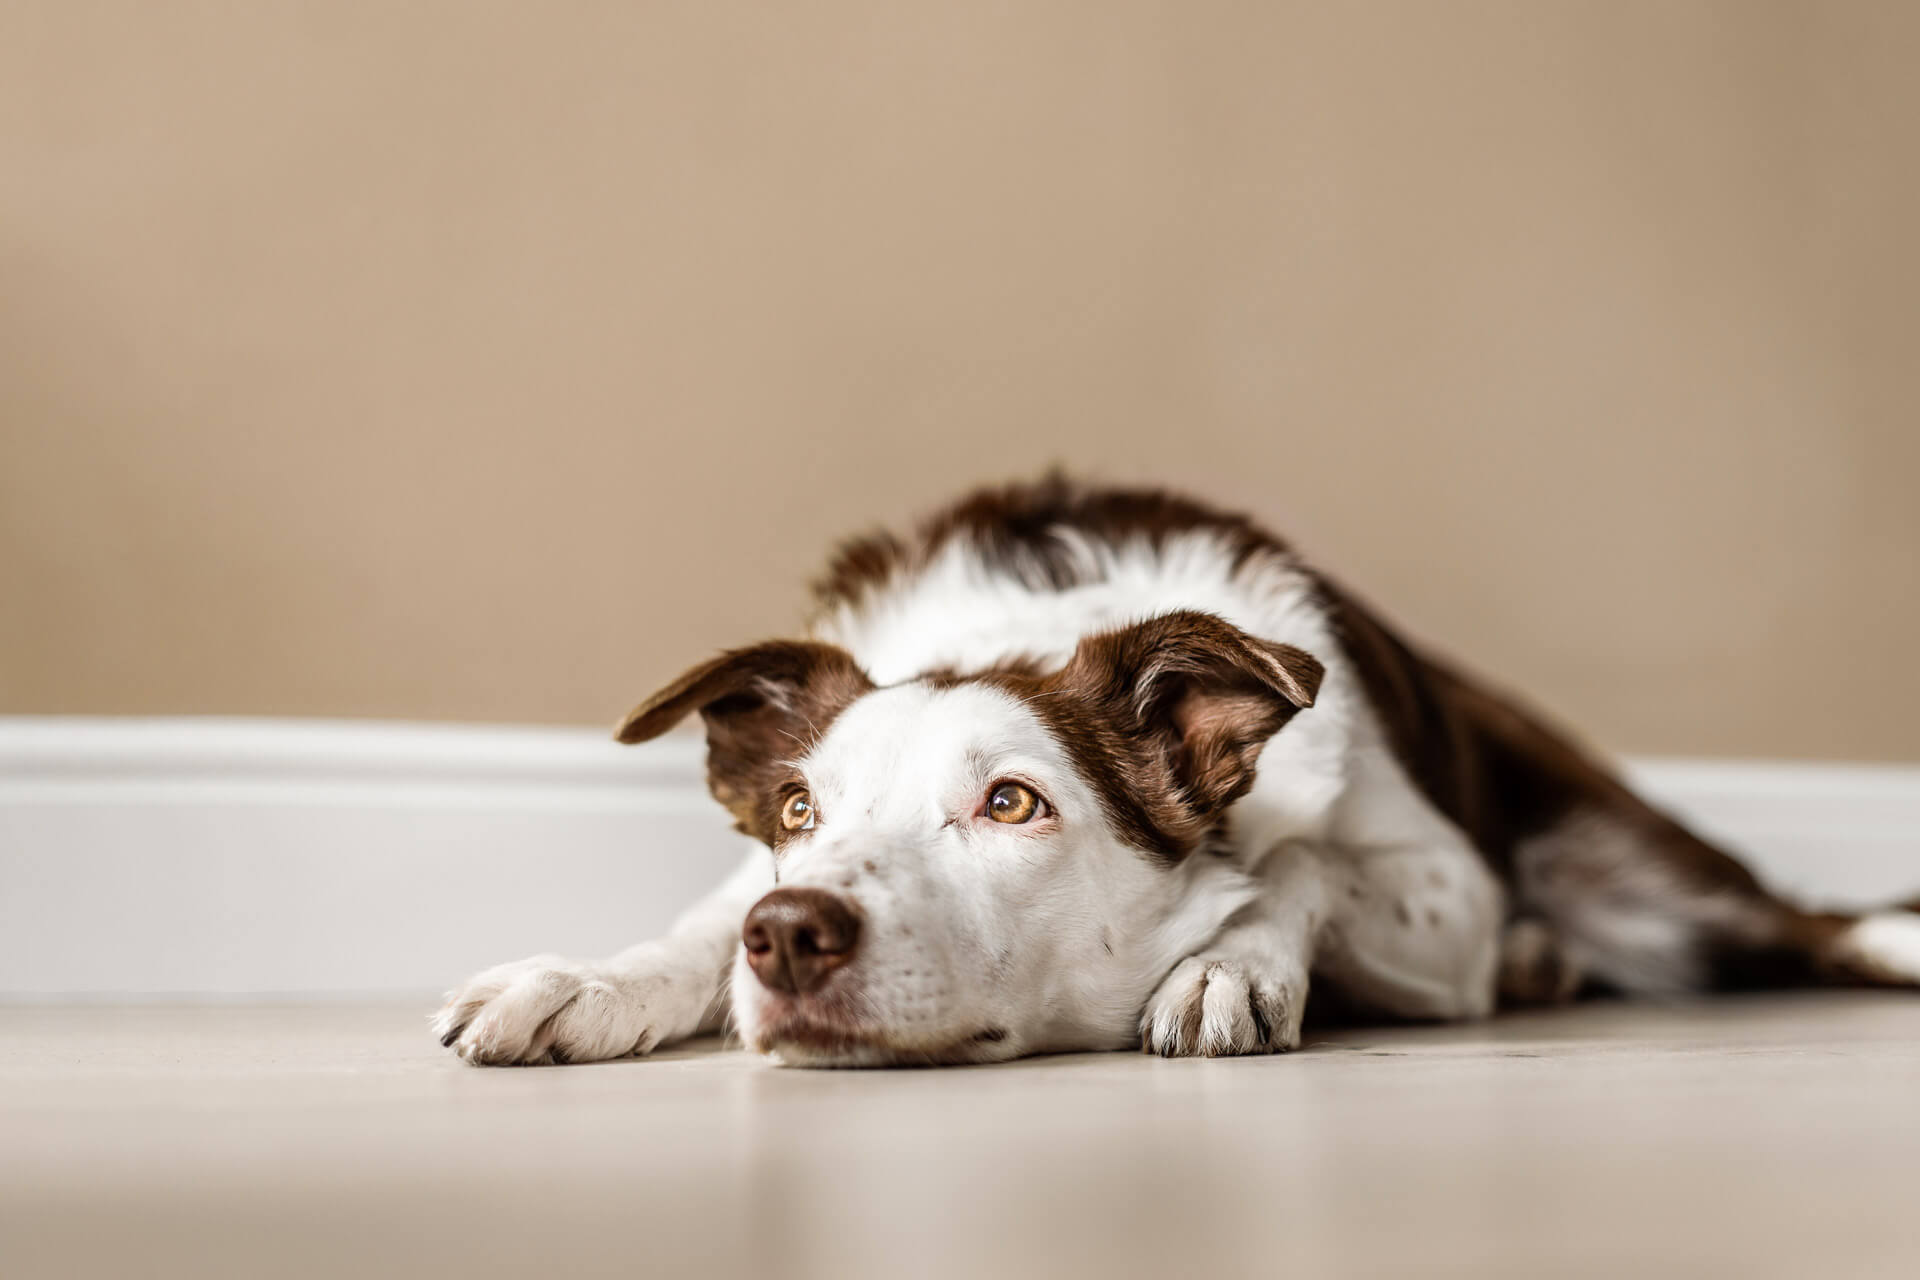 How long can a dog be left alone?